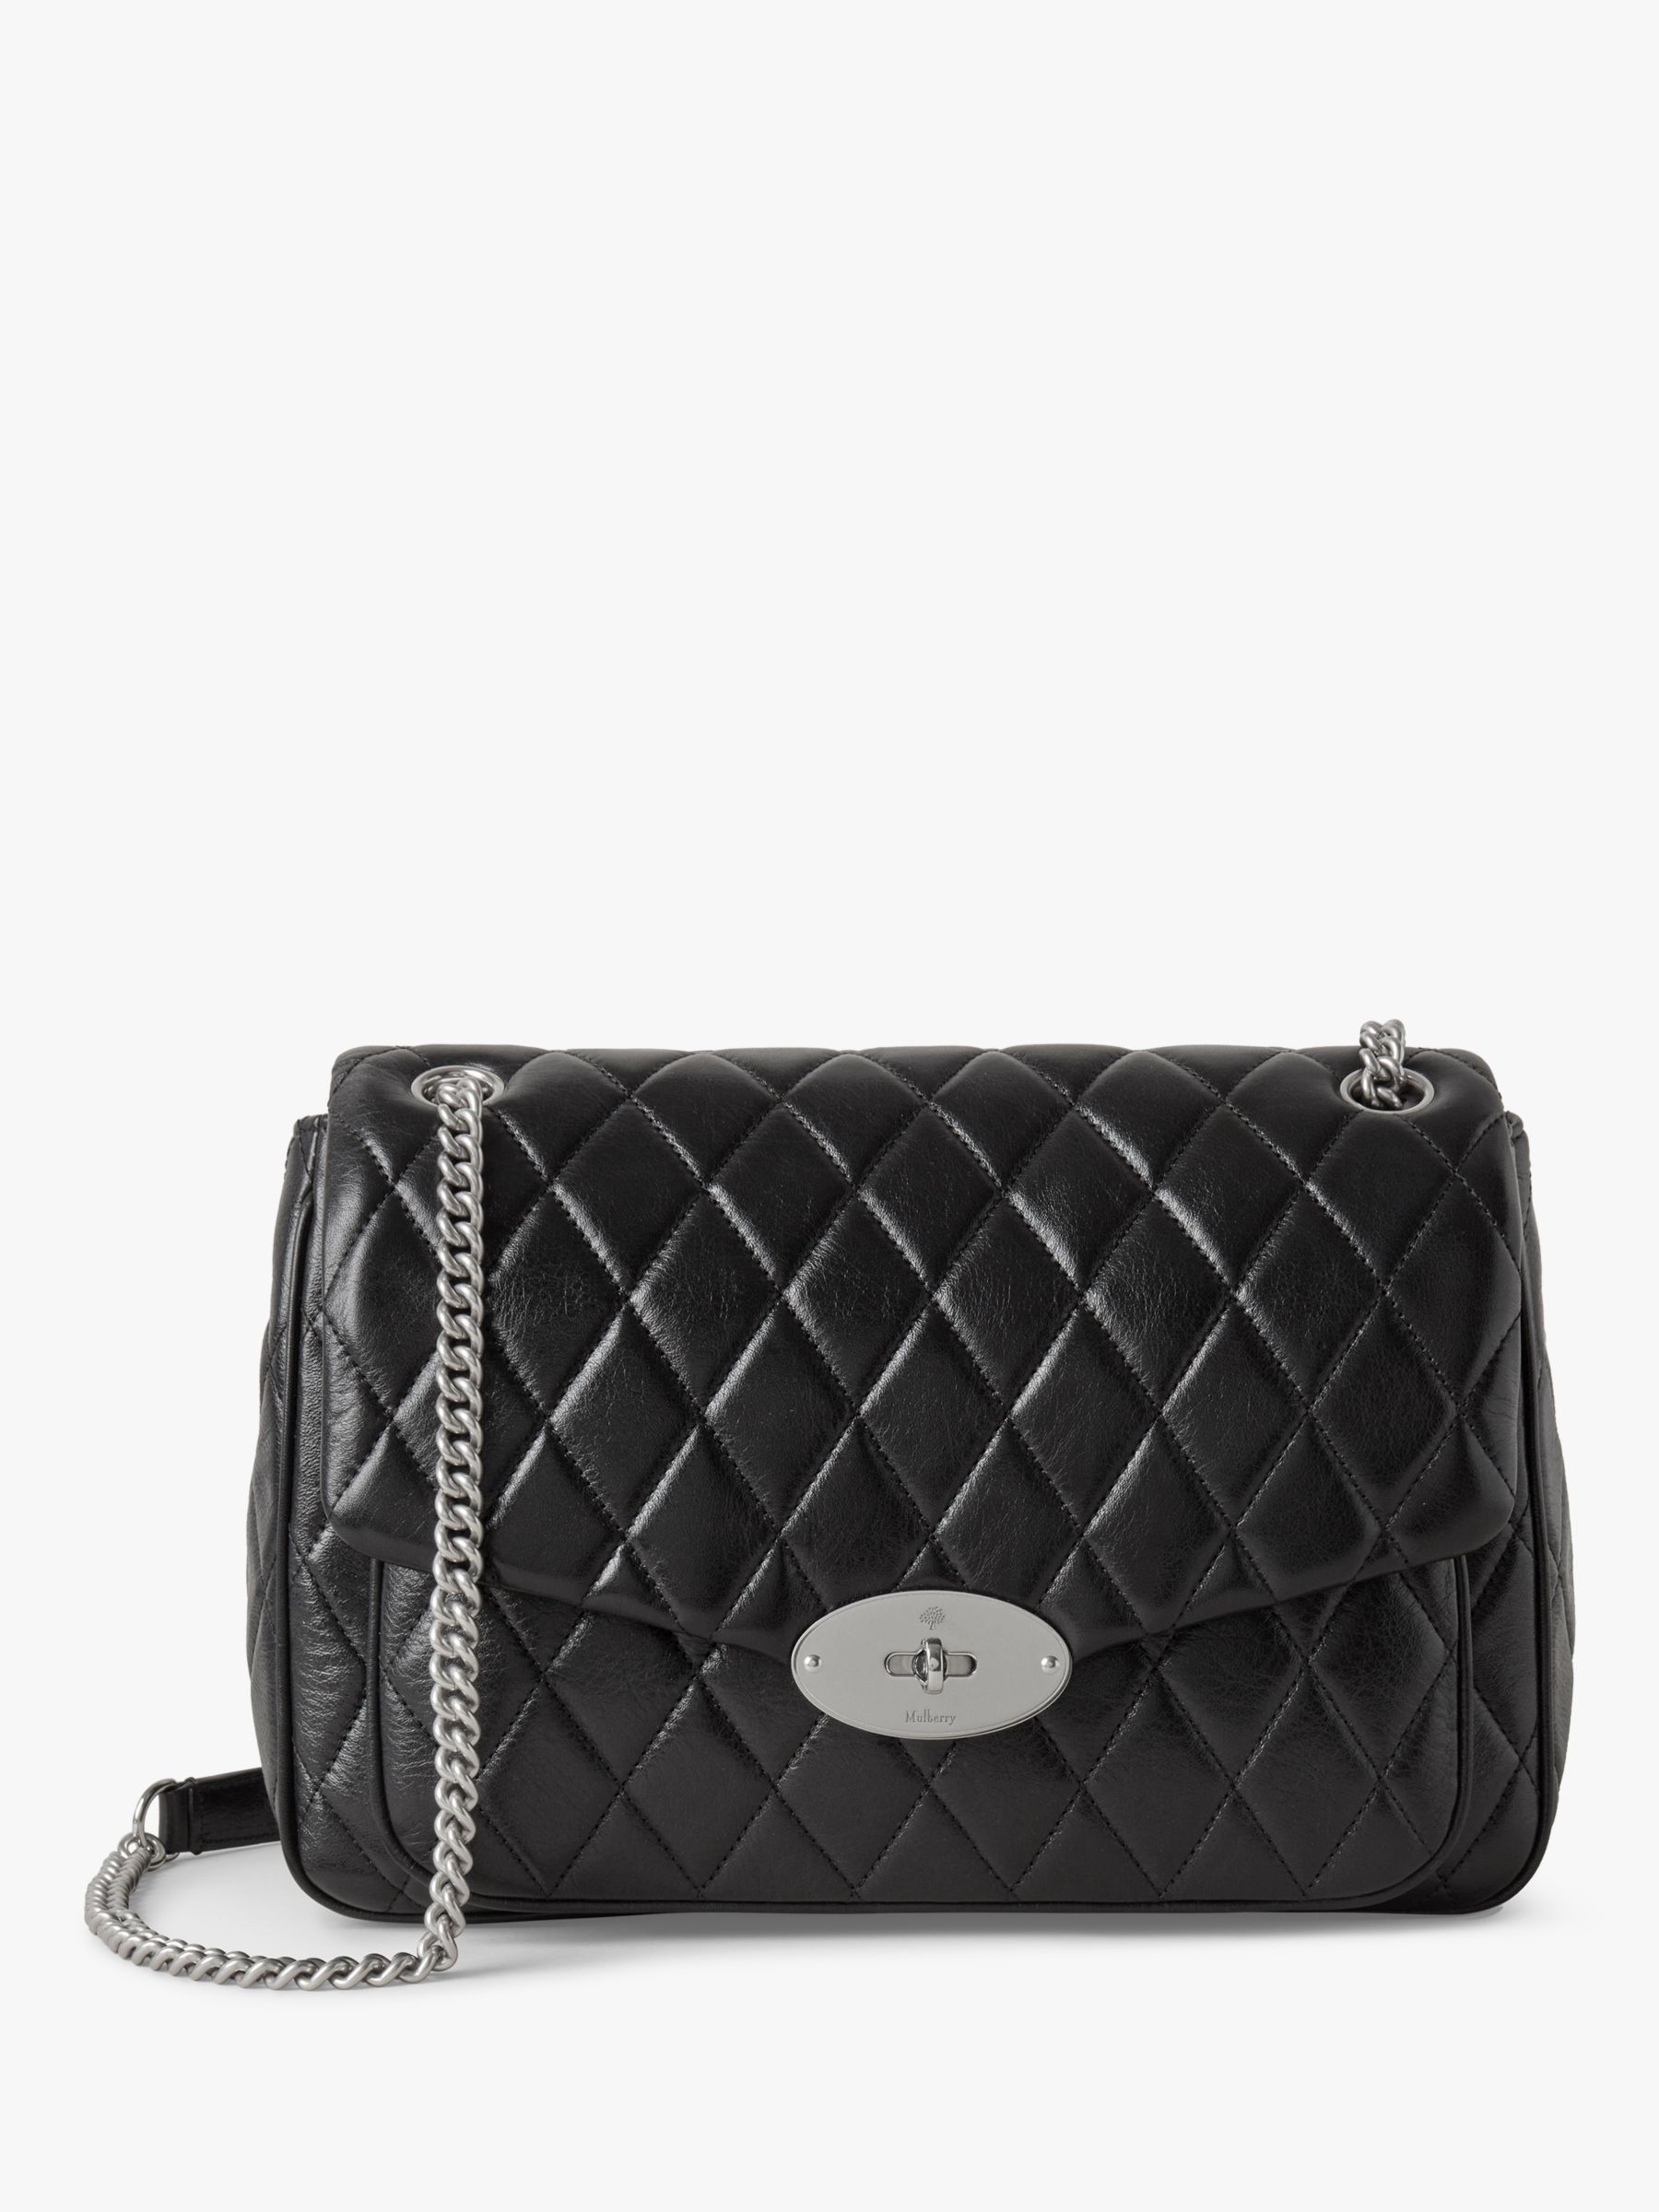 Mulberry Darley Quilted Shiny Calf Leather Shoulder Bag, Black